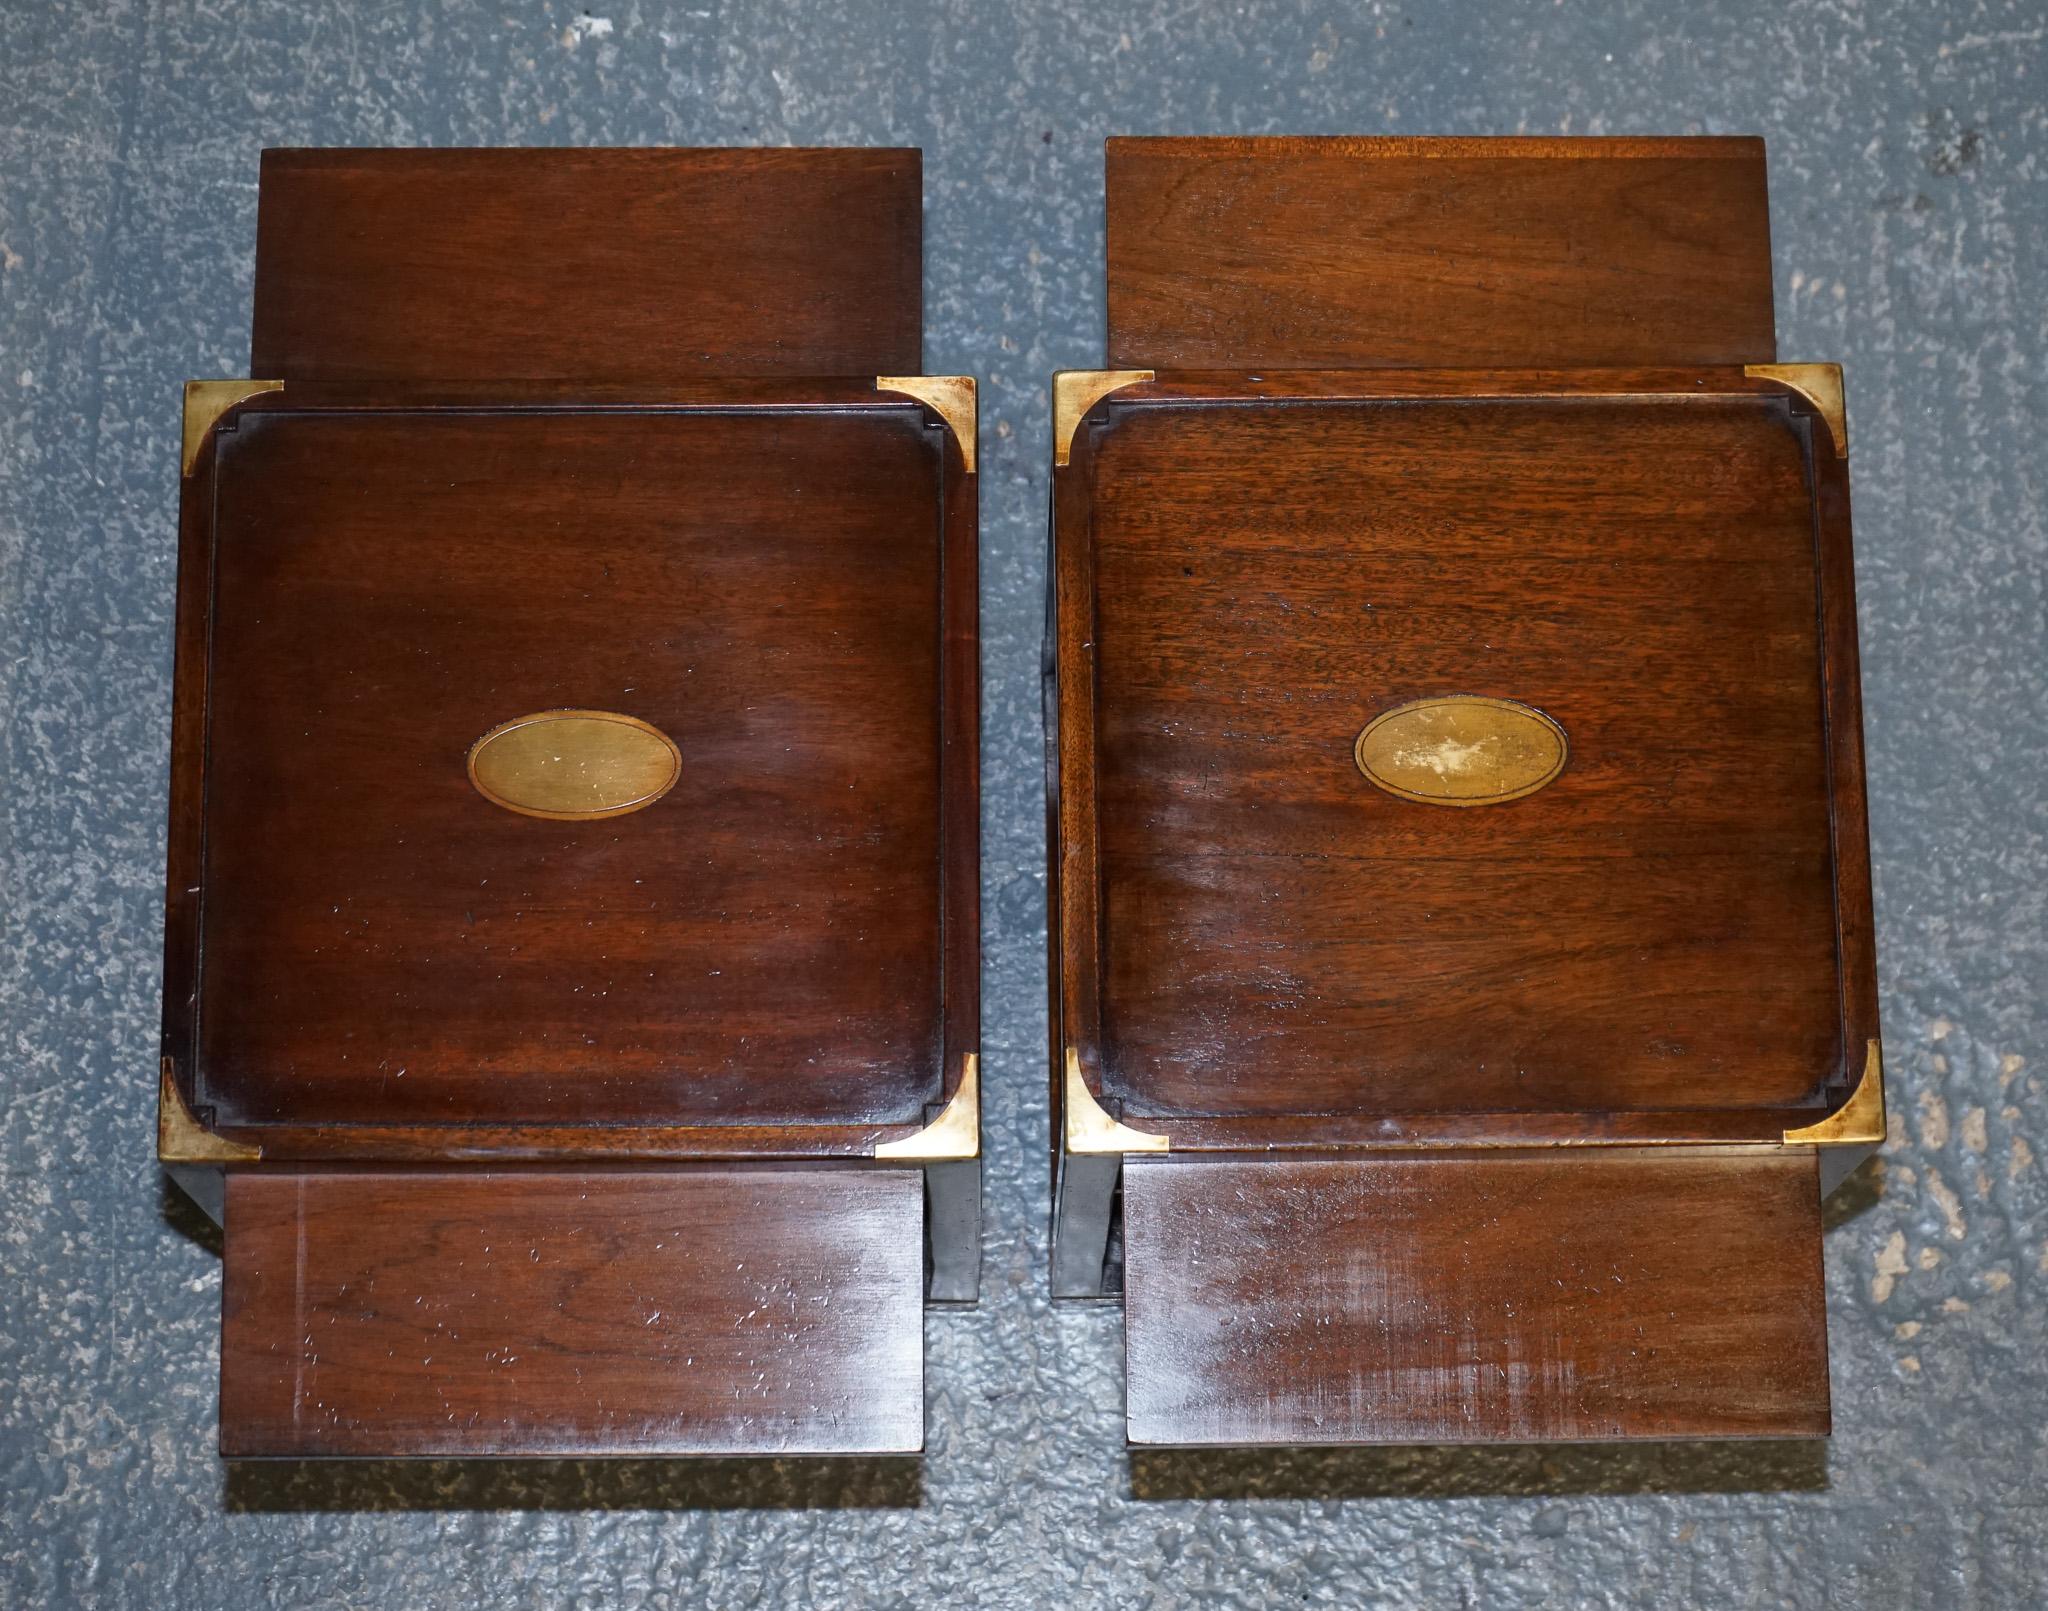 RESTORED PAiR OF HARRODS KENNEDY DOUBLE SIDED CAMPAIGN SIDE TABLES BUTLER TRAYS  3